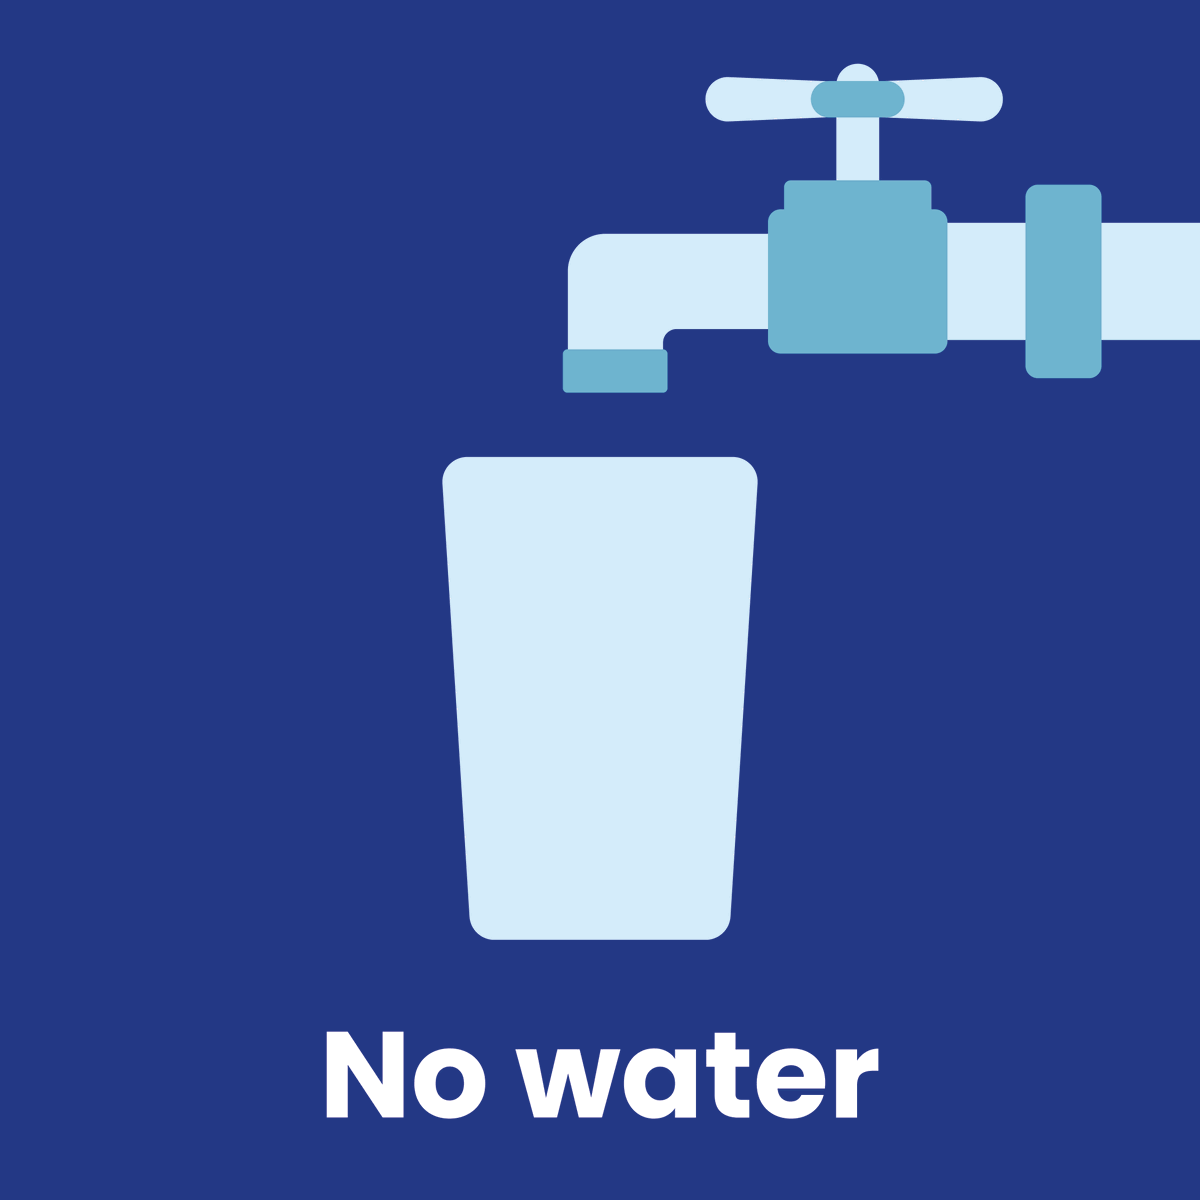 #BB18 #SkiptonRoad #Earby . Good morning. Customers may have low pressure or no water because of a burst water main. We're working hard to get your water supply back to normal as soon as possible. Updates will follow.